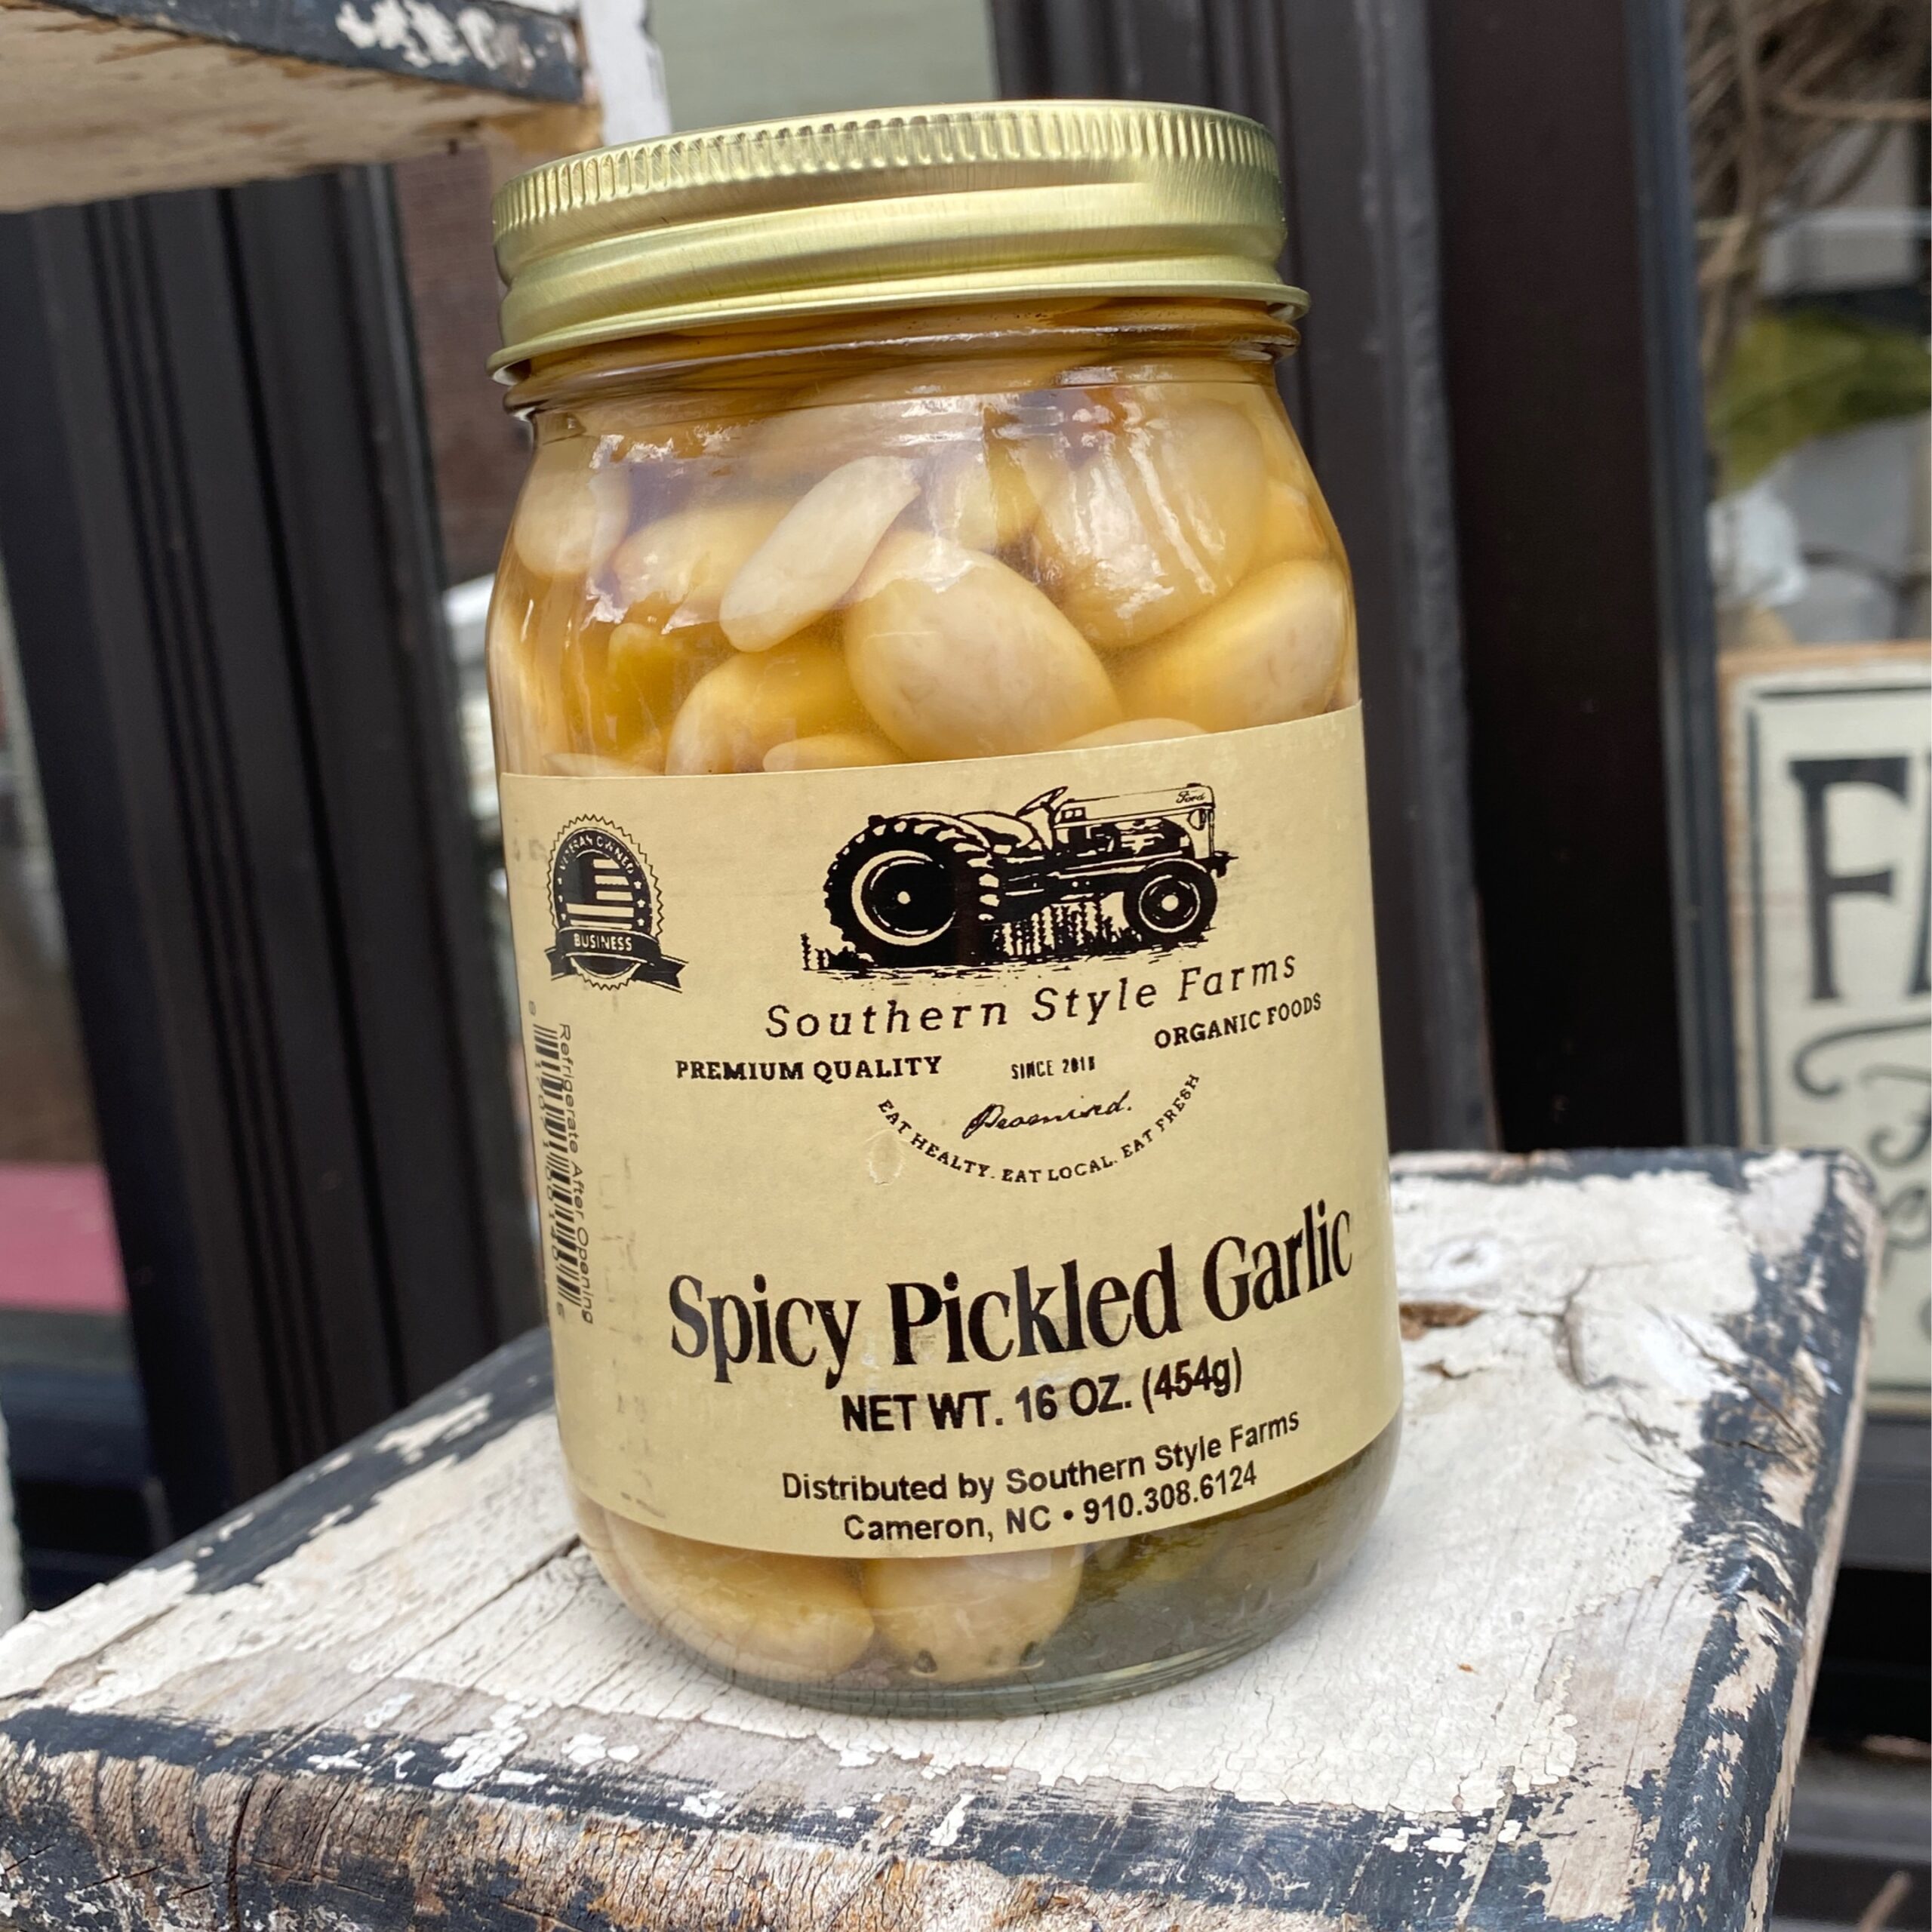 Southern Style Farms Spicy Pickled Garlic 16oz